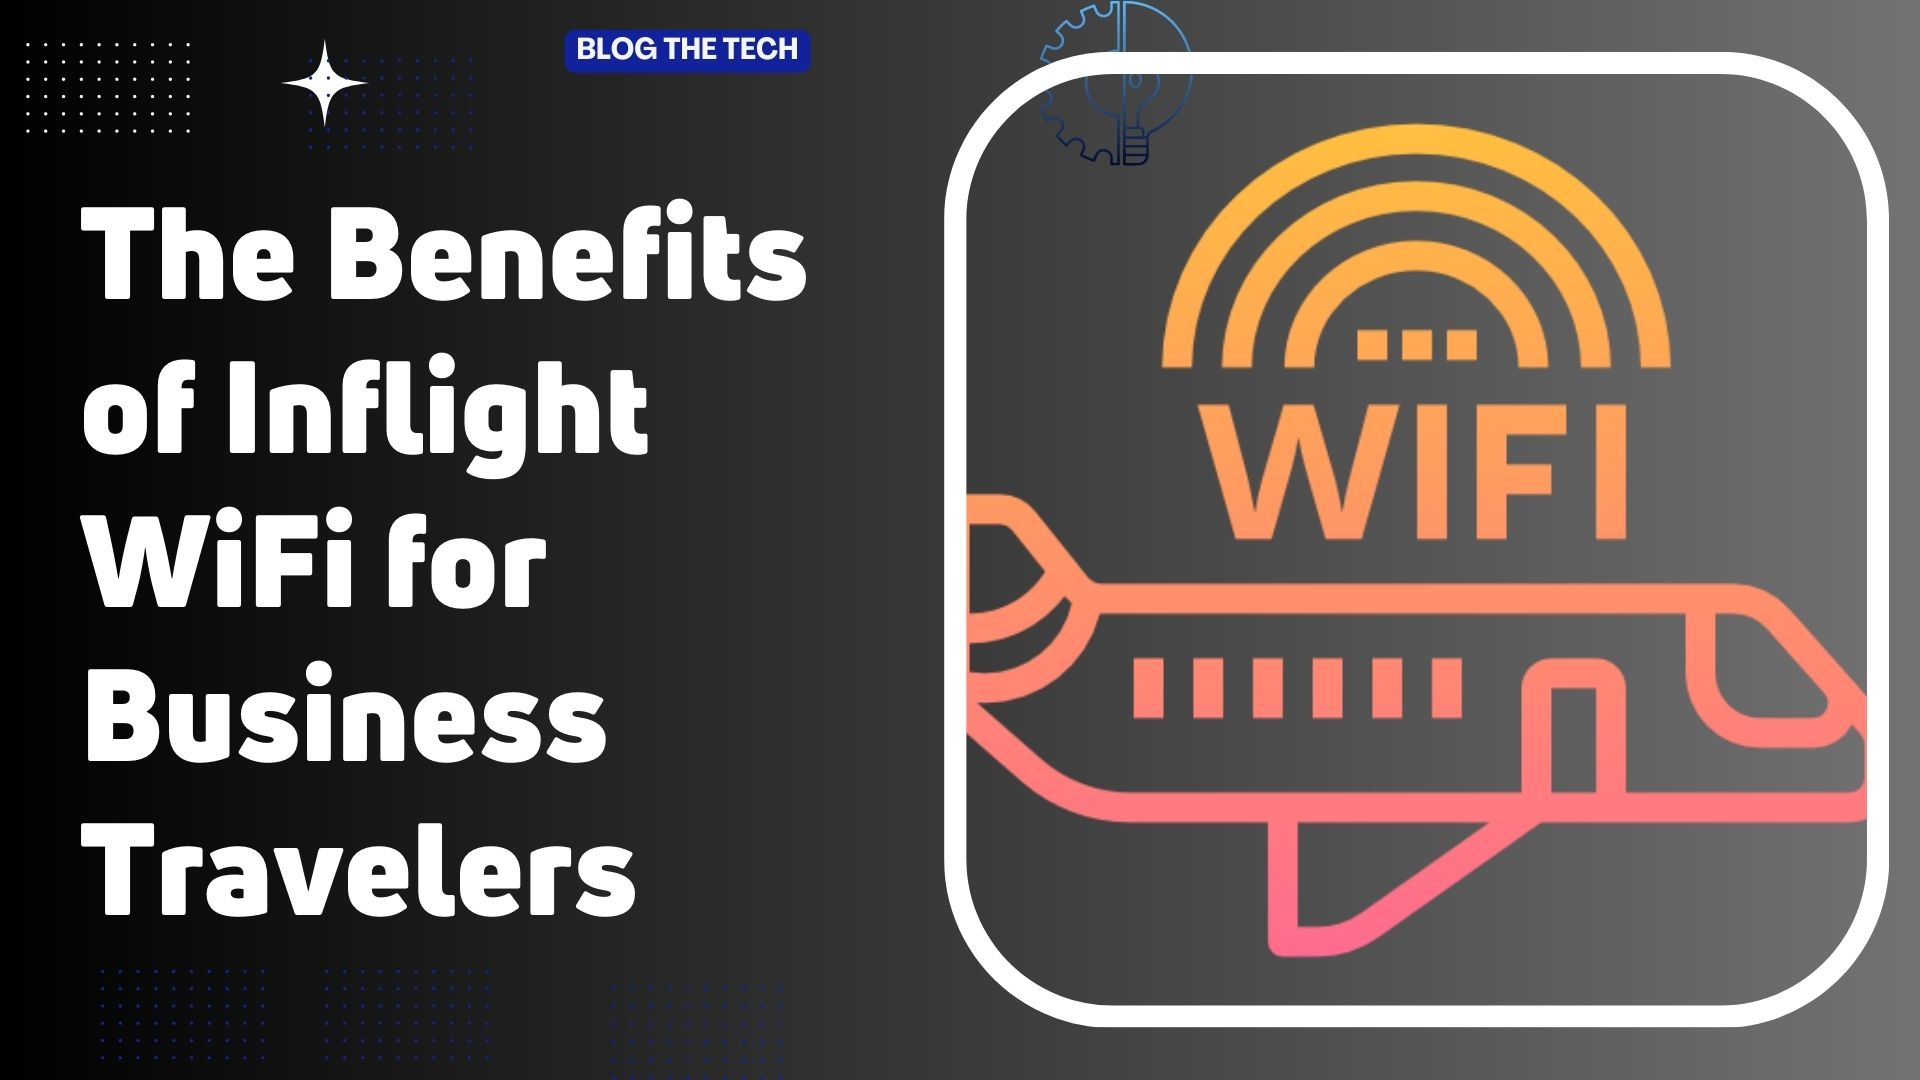 The Benefits of Inflight WiFi for Business Travelers